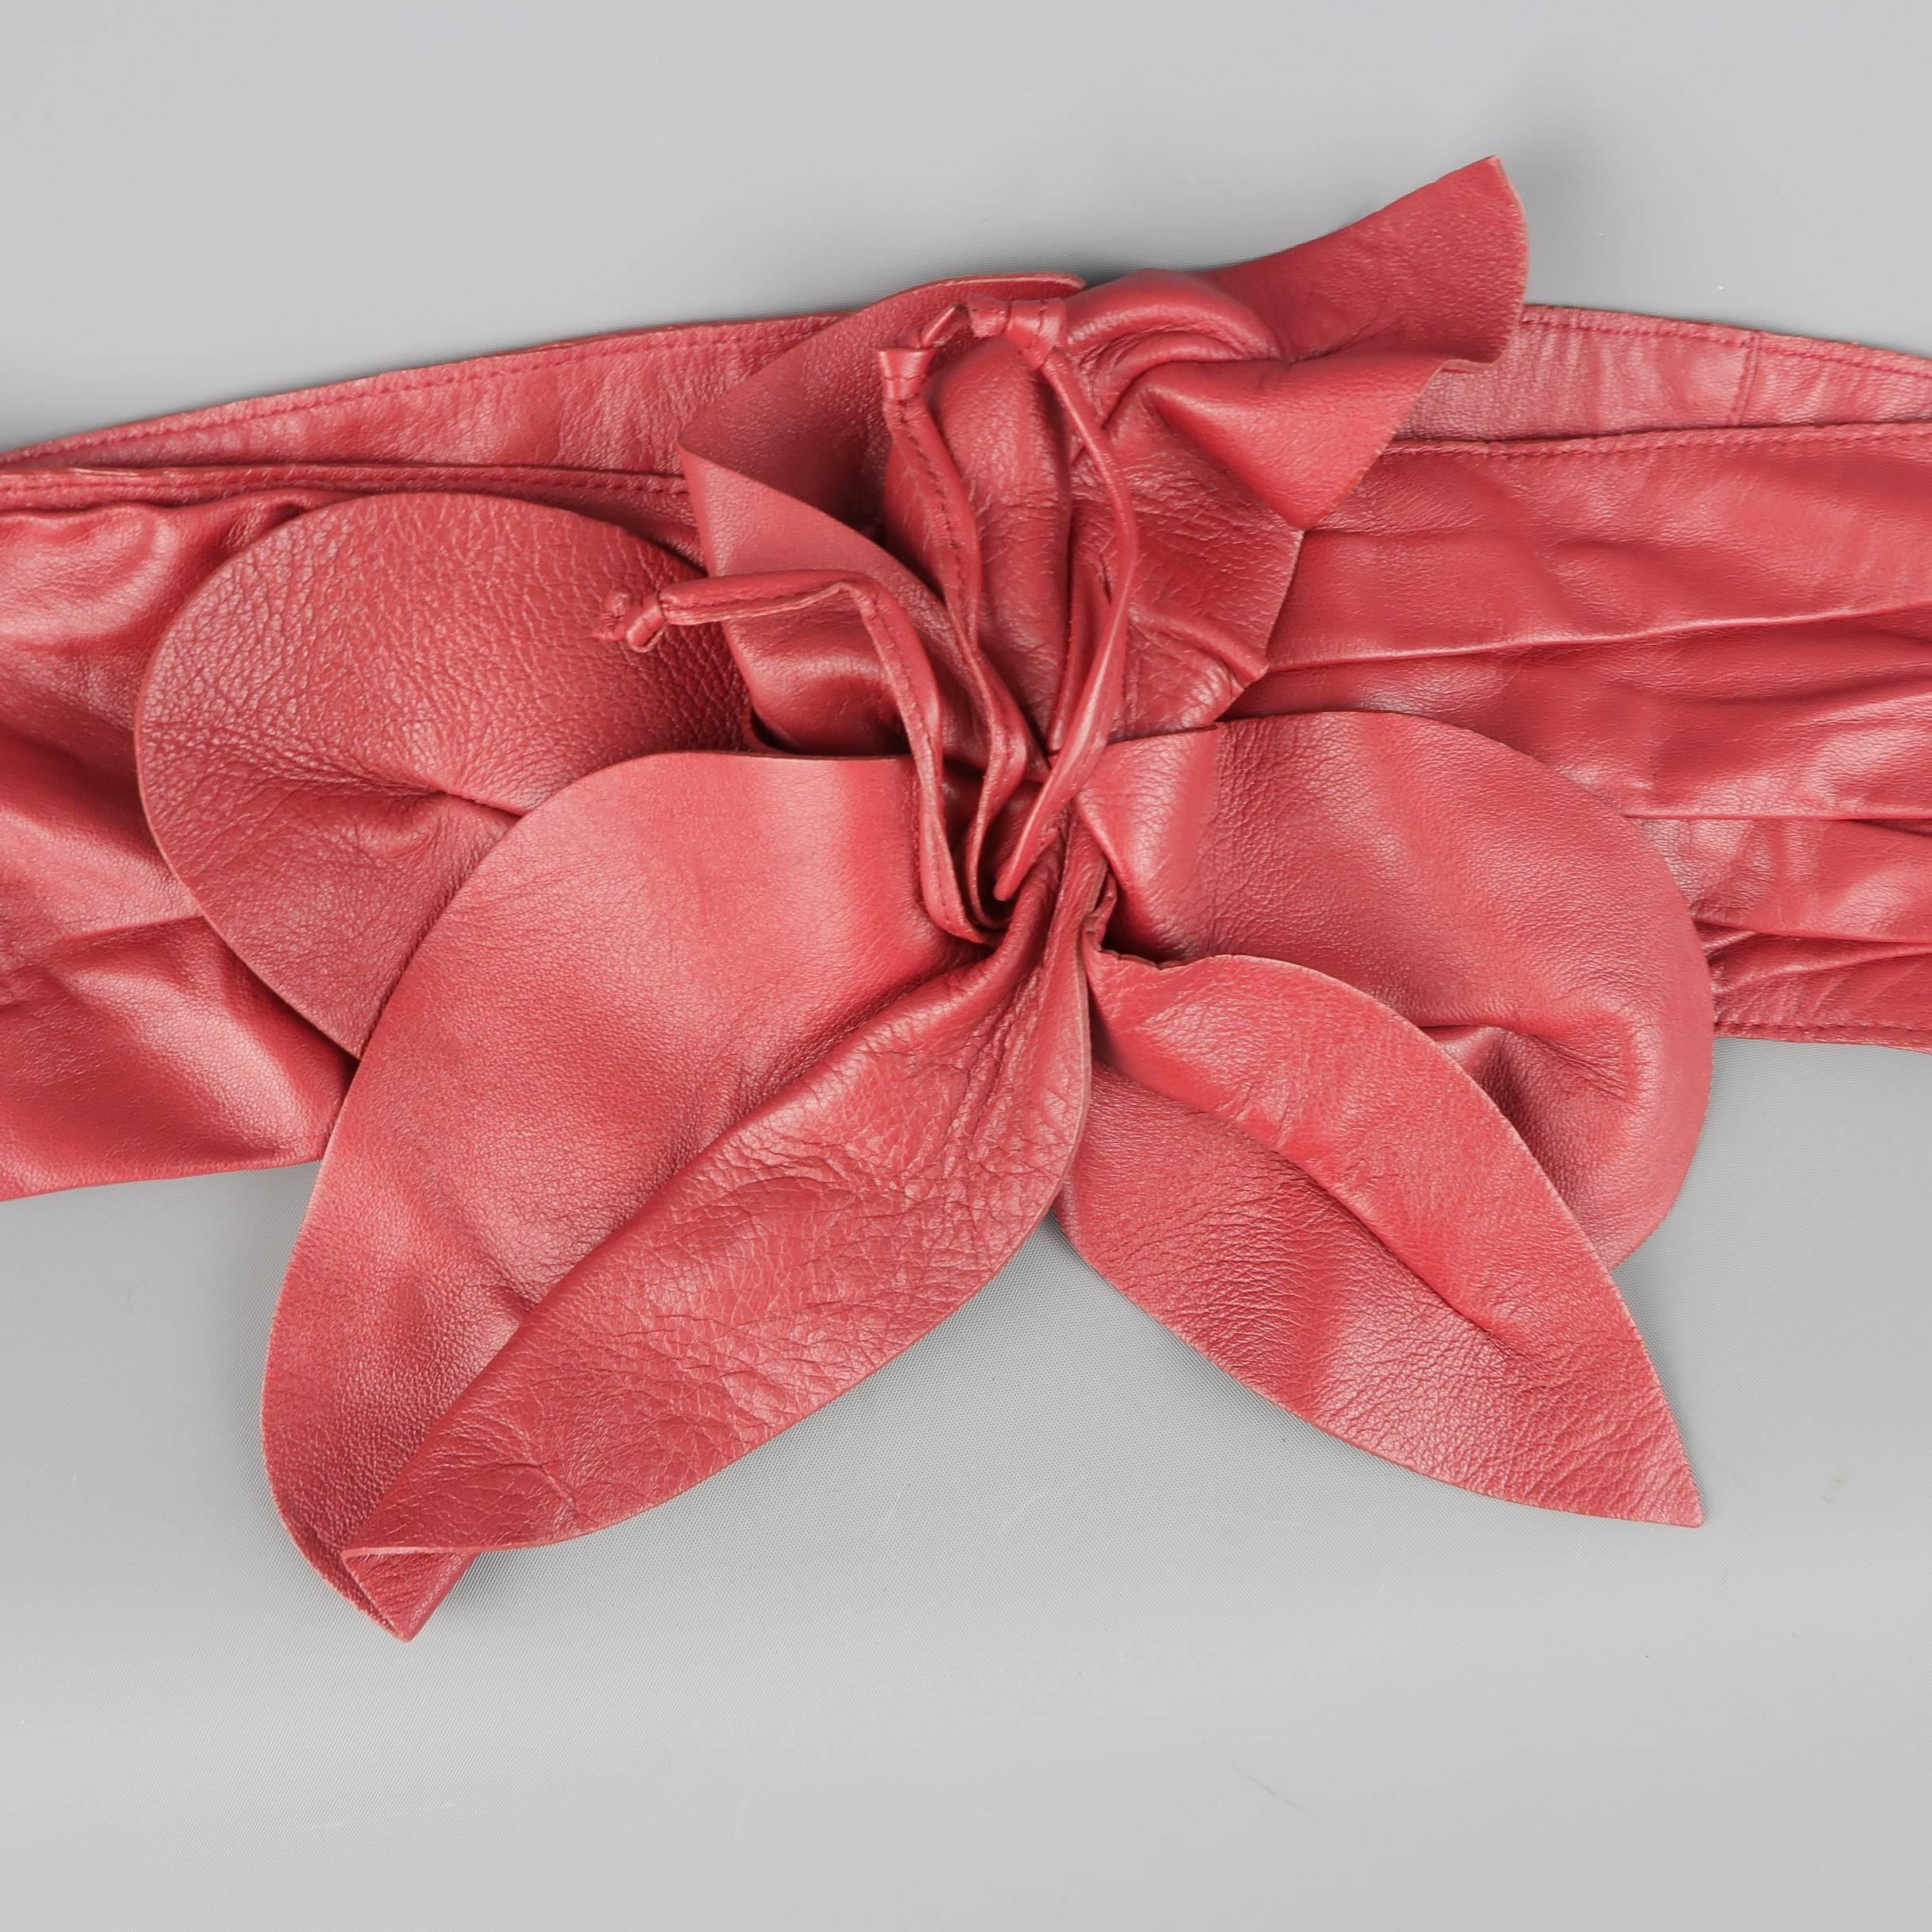 MARC JACOBS Spring 2011 Collection statement hip belt comes in a soft red leather and features a pleated sash with oversized flower.
 
Excellent Pre-Owned Condition.
Marked: S
 
Length: 36 in.
Width: 4.5 in.
Fits: 34 - 34 in.

SKU: 87210